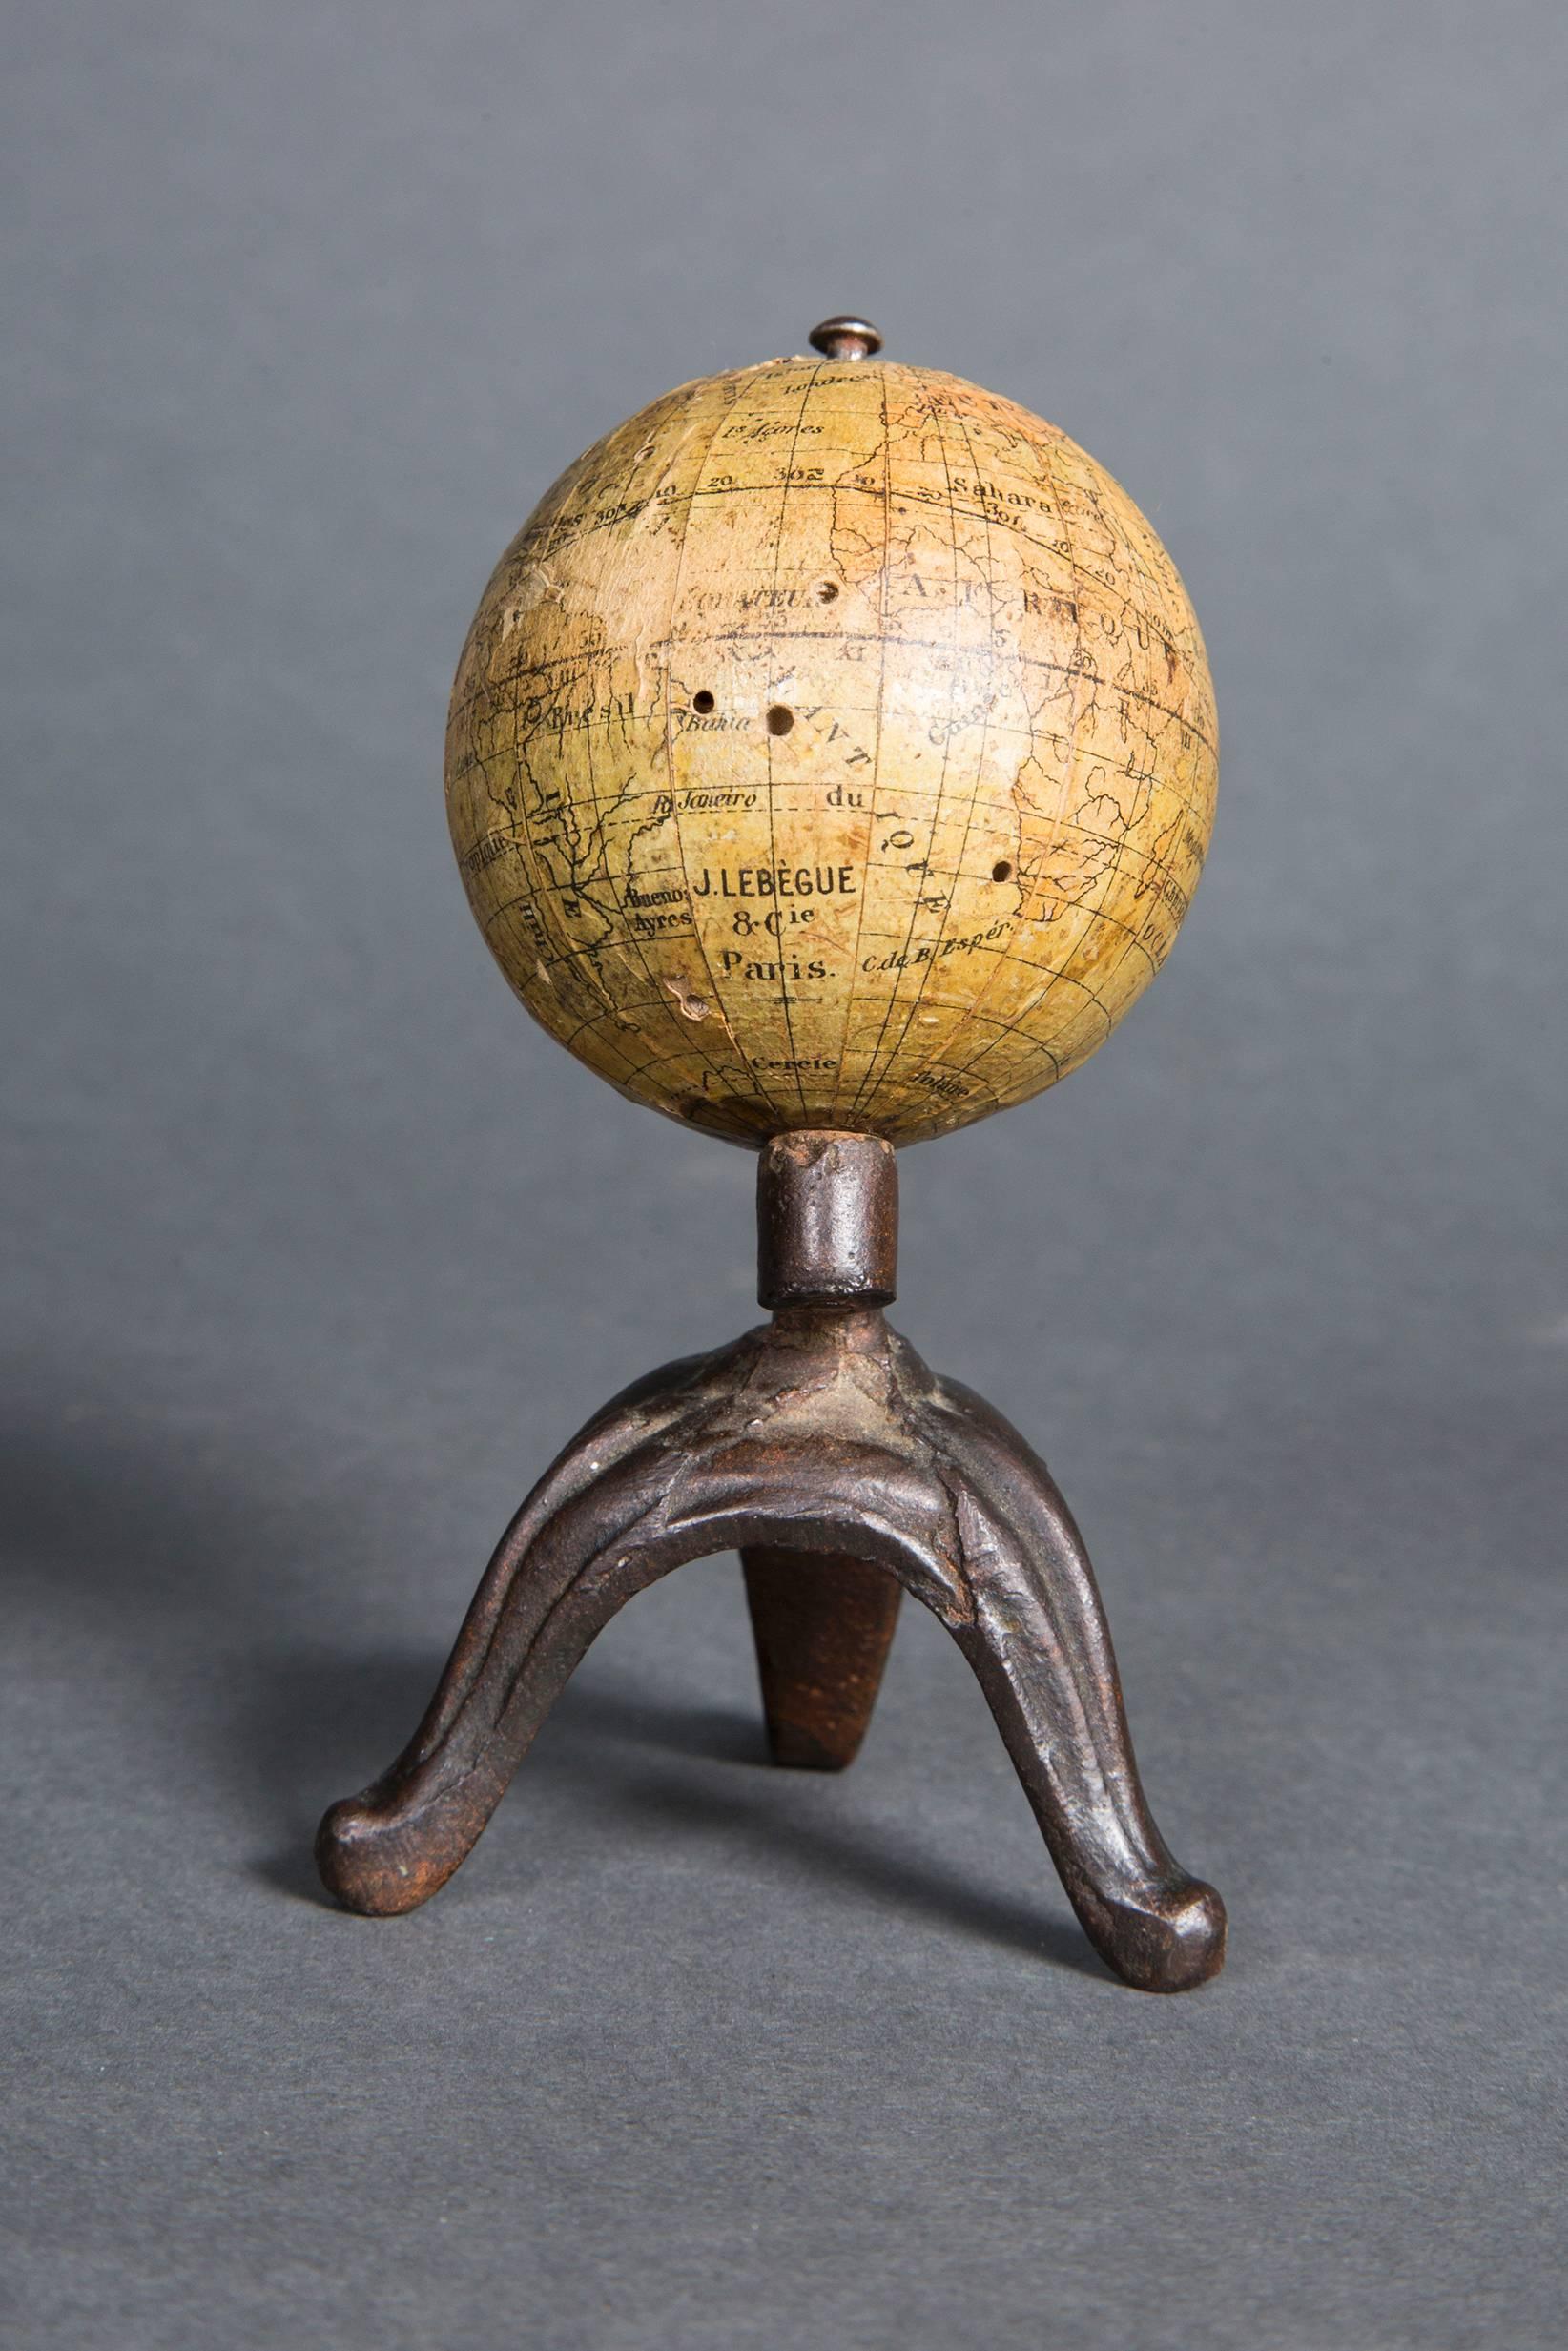 Image 2 /3: Globe terrestre by J. LEBEGUE 8 Cie, Paris, 19th century, in wood and paper on a bronze stand.
Few stitches.
Diameter 5.5 cm.
Height 11.5 cm.

Image 4/5: Globe by J.L. & Cie Paris, 19th century, on an ebonized wood stand.
Diameter